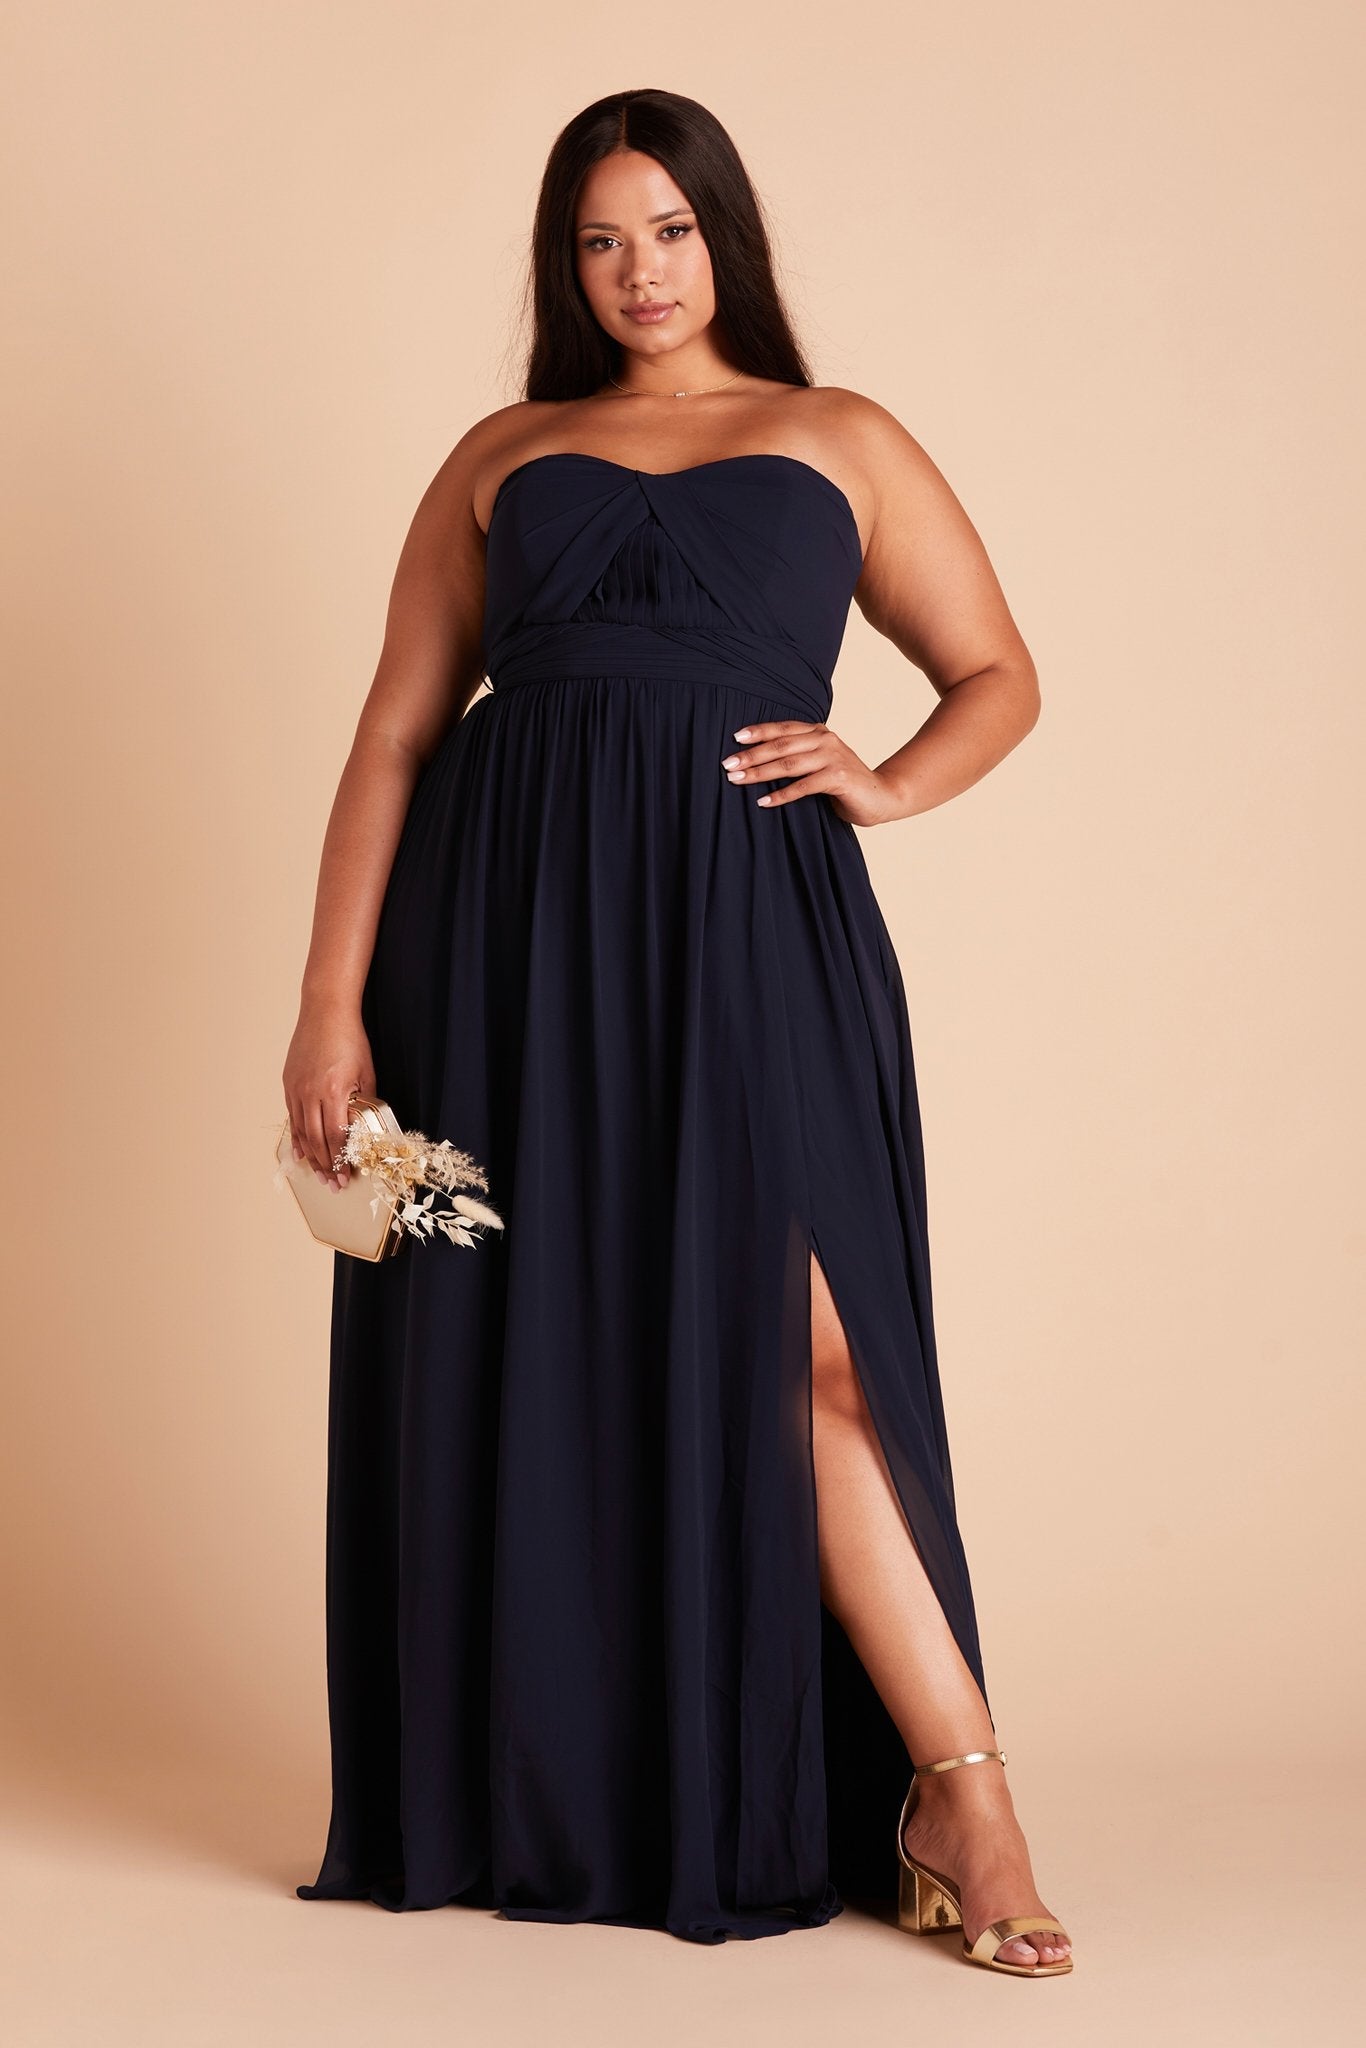 Grace convertible plus size bridesmaid dress with slit in navy blue chiffon by Birdy Grey, front view